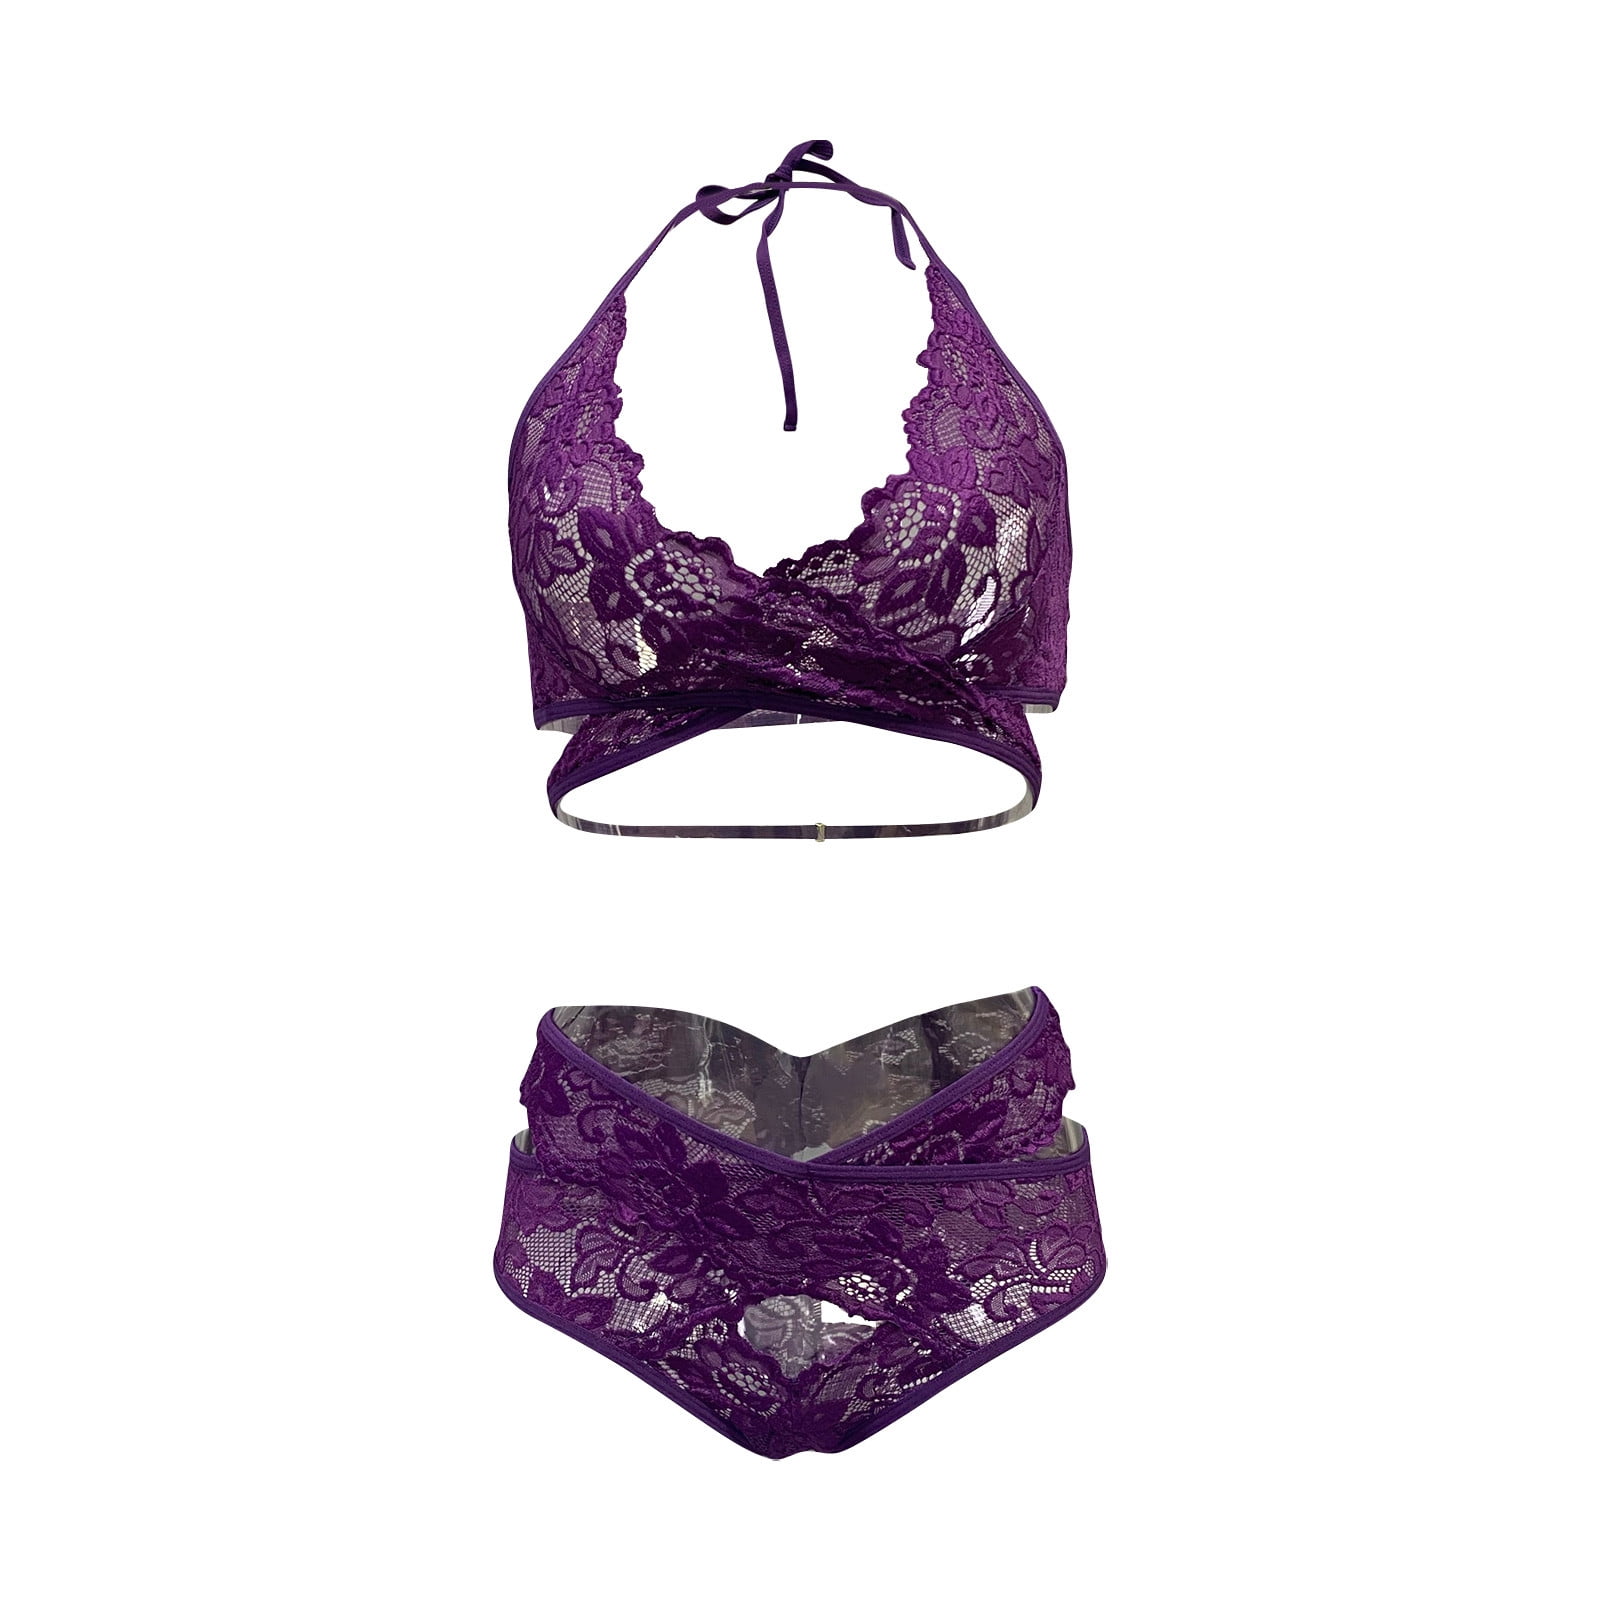 RQYYD Sexy Lingerie for Women,Two Piece Lace Lingerie Set